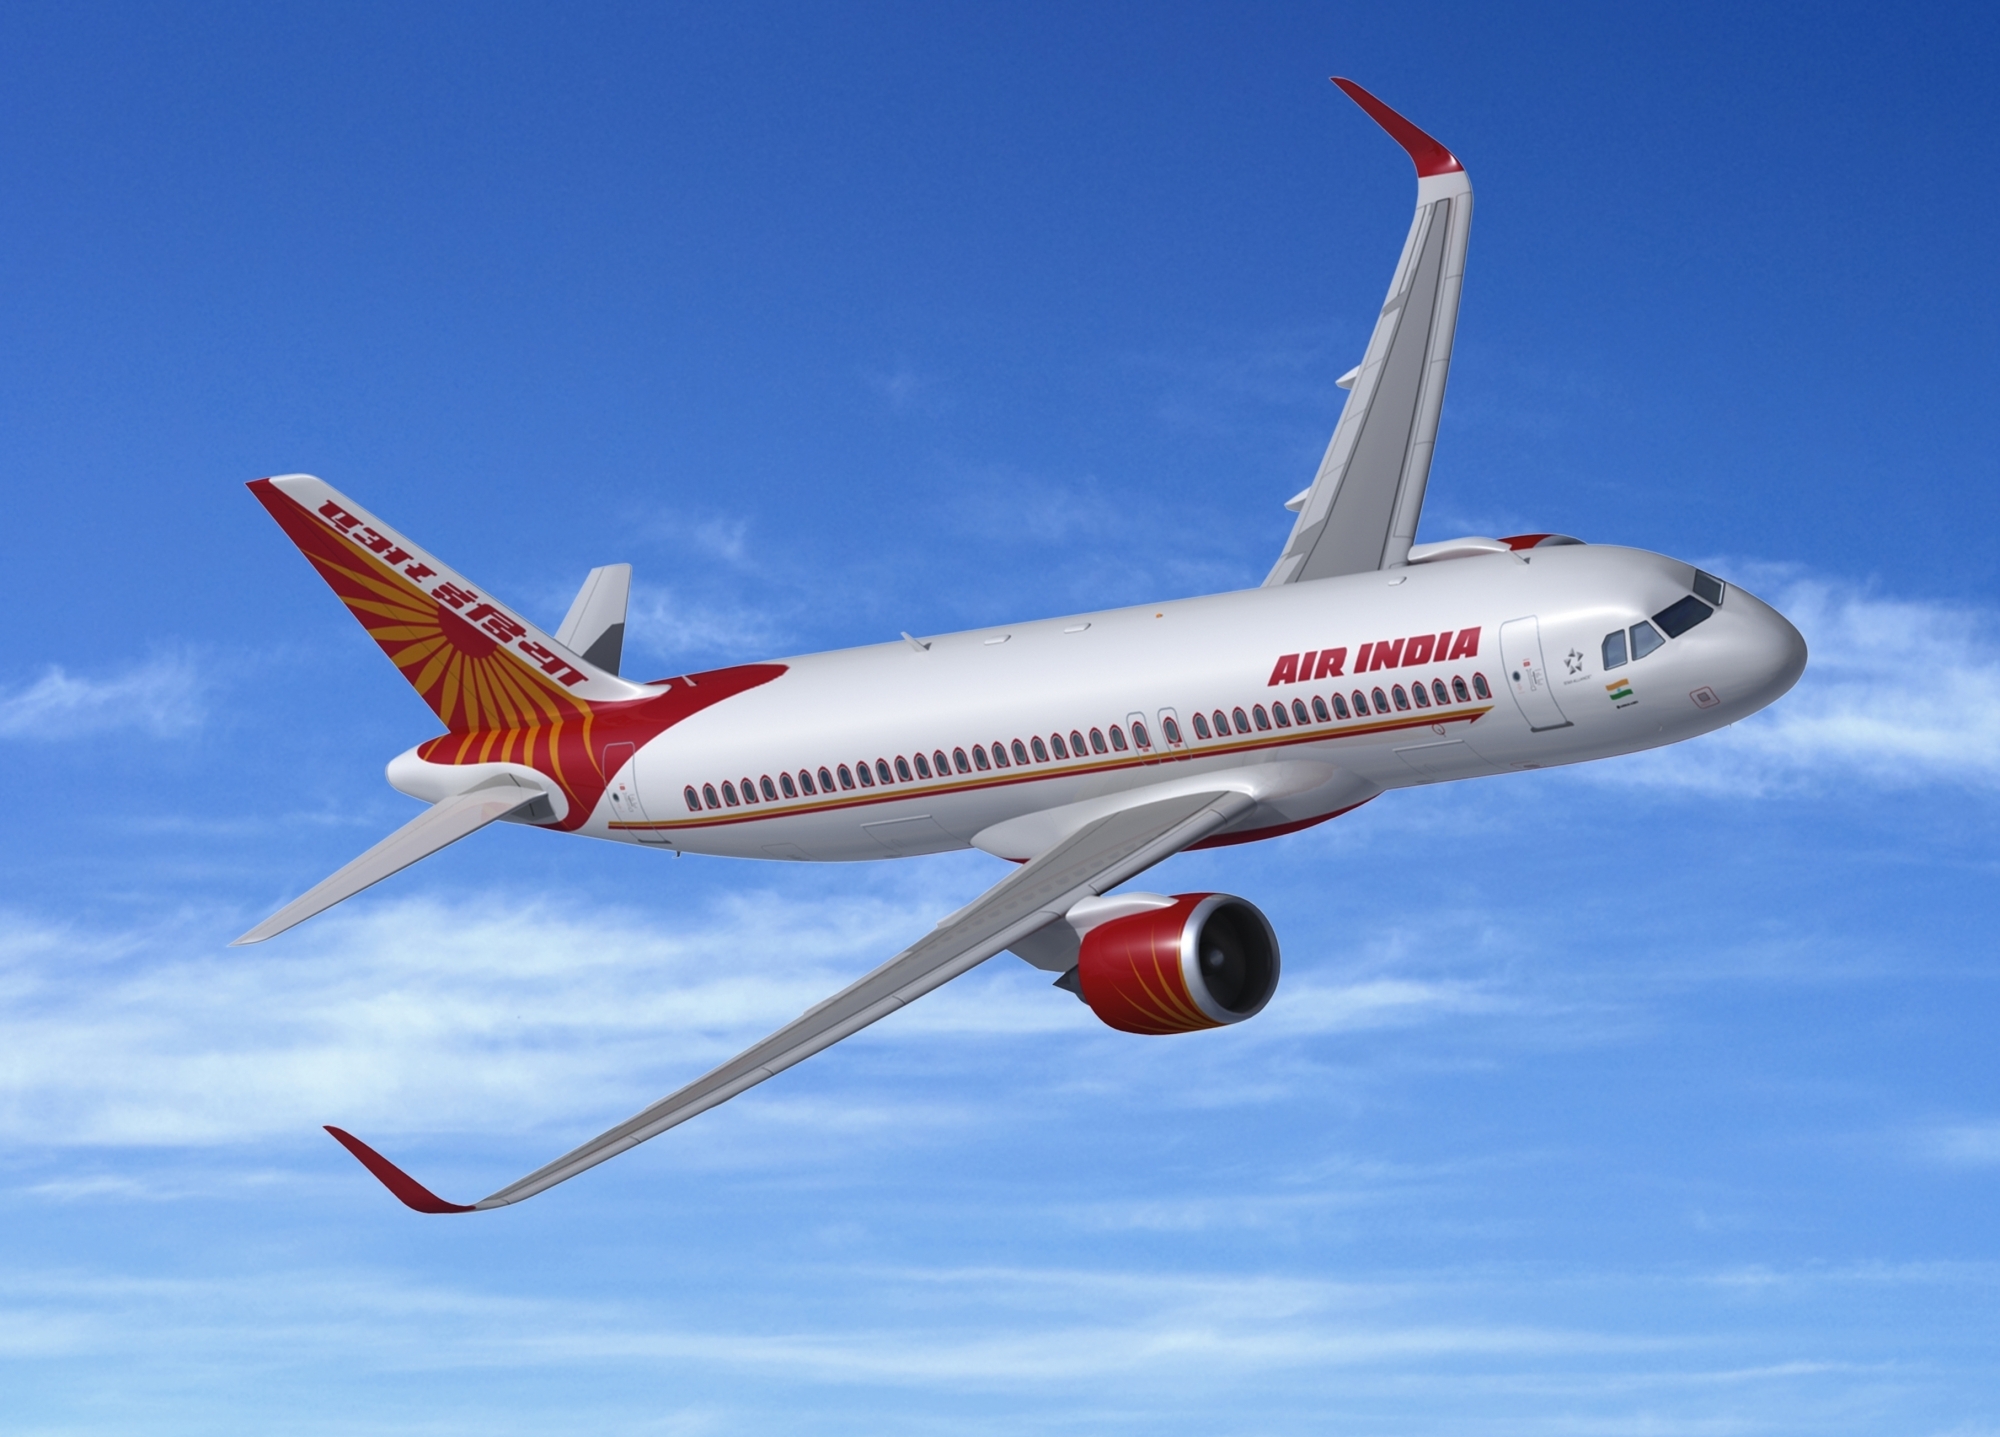 Air India Express offers home Covid tests